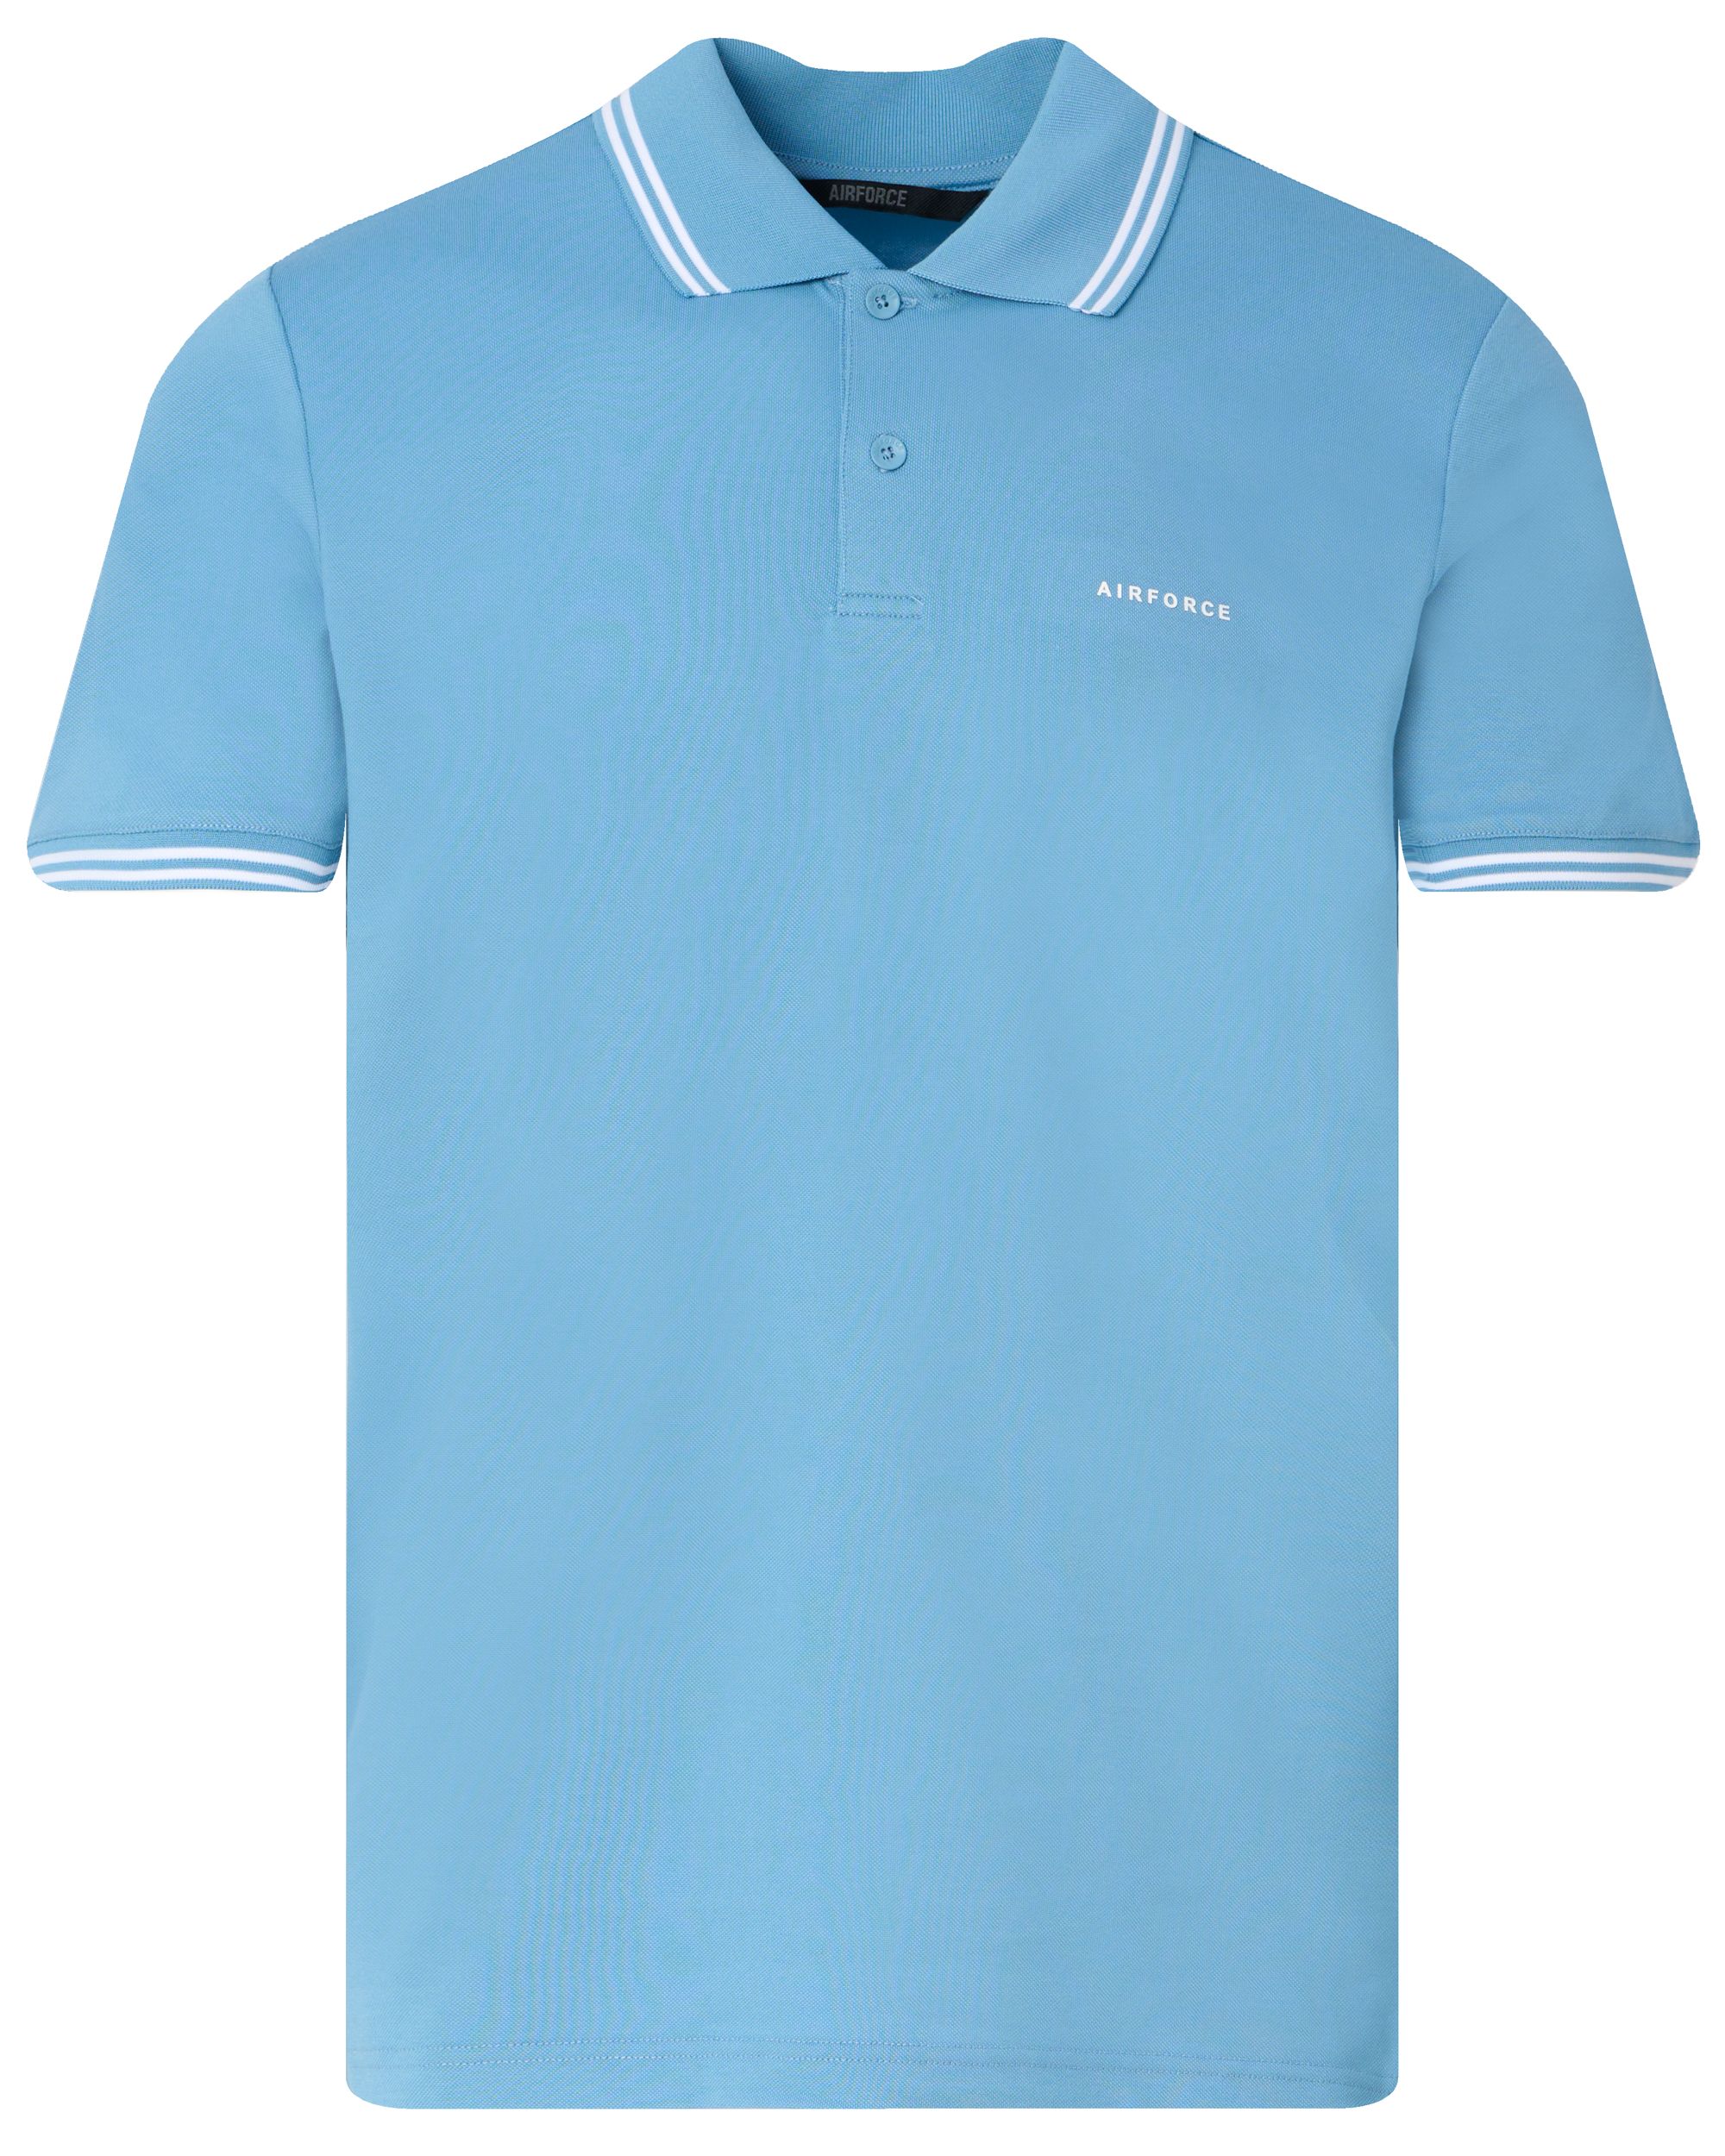 Airforce Polo KM Donker blauw 092911-001-L